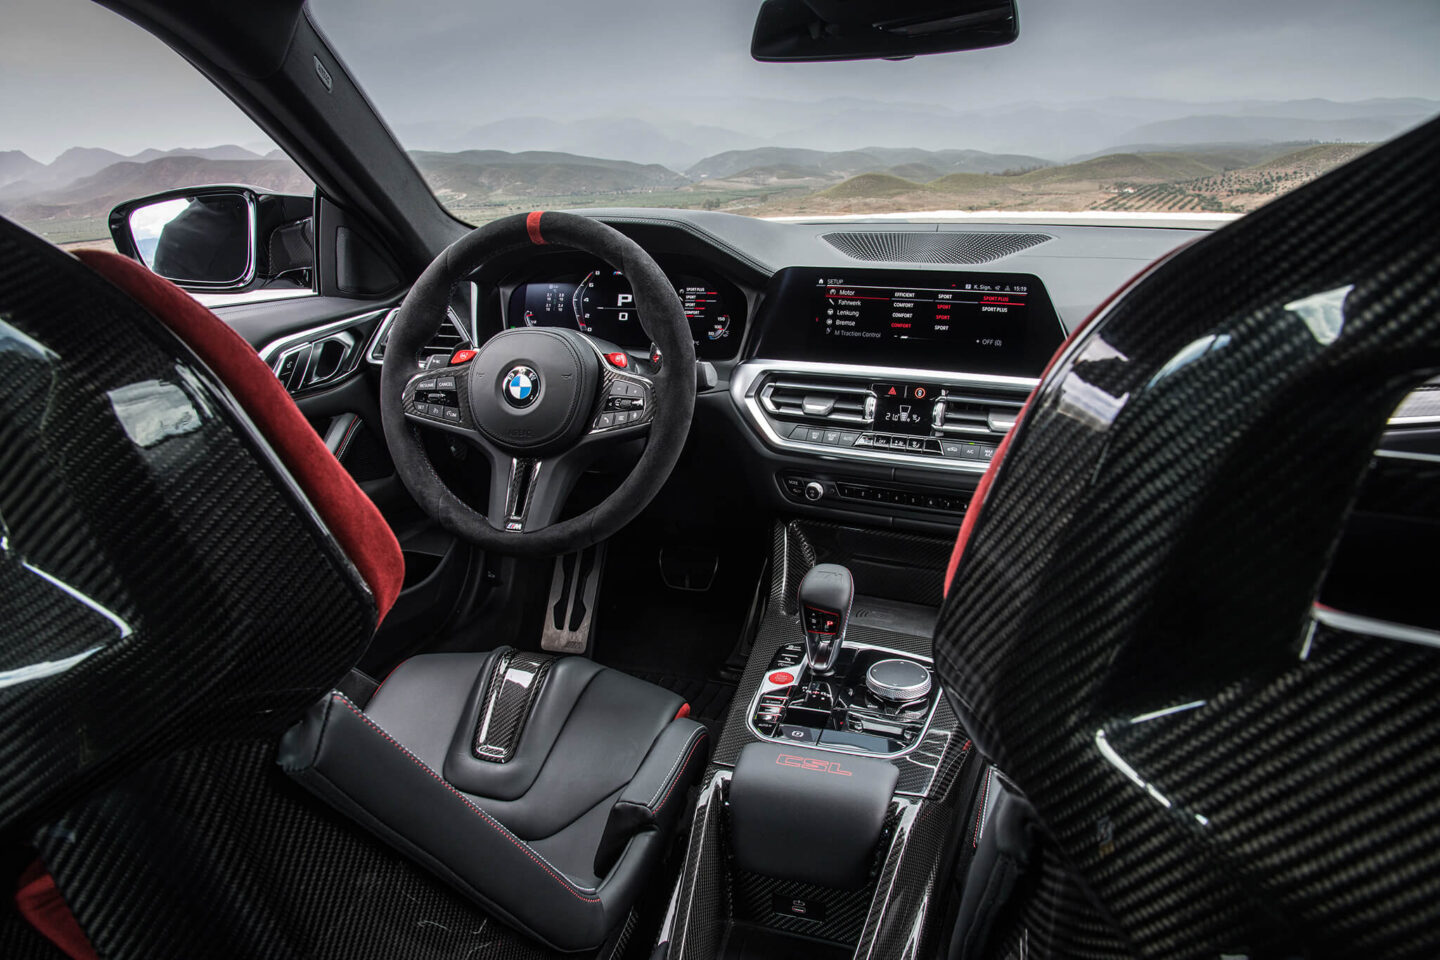 The interior of the BMW M4 CSL